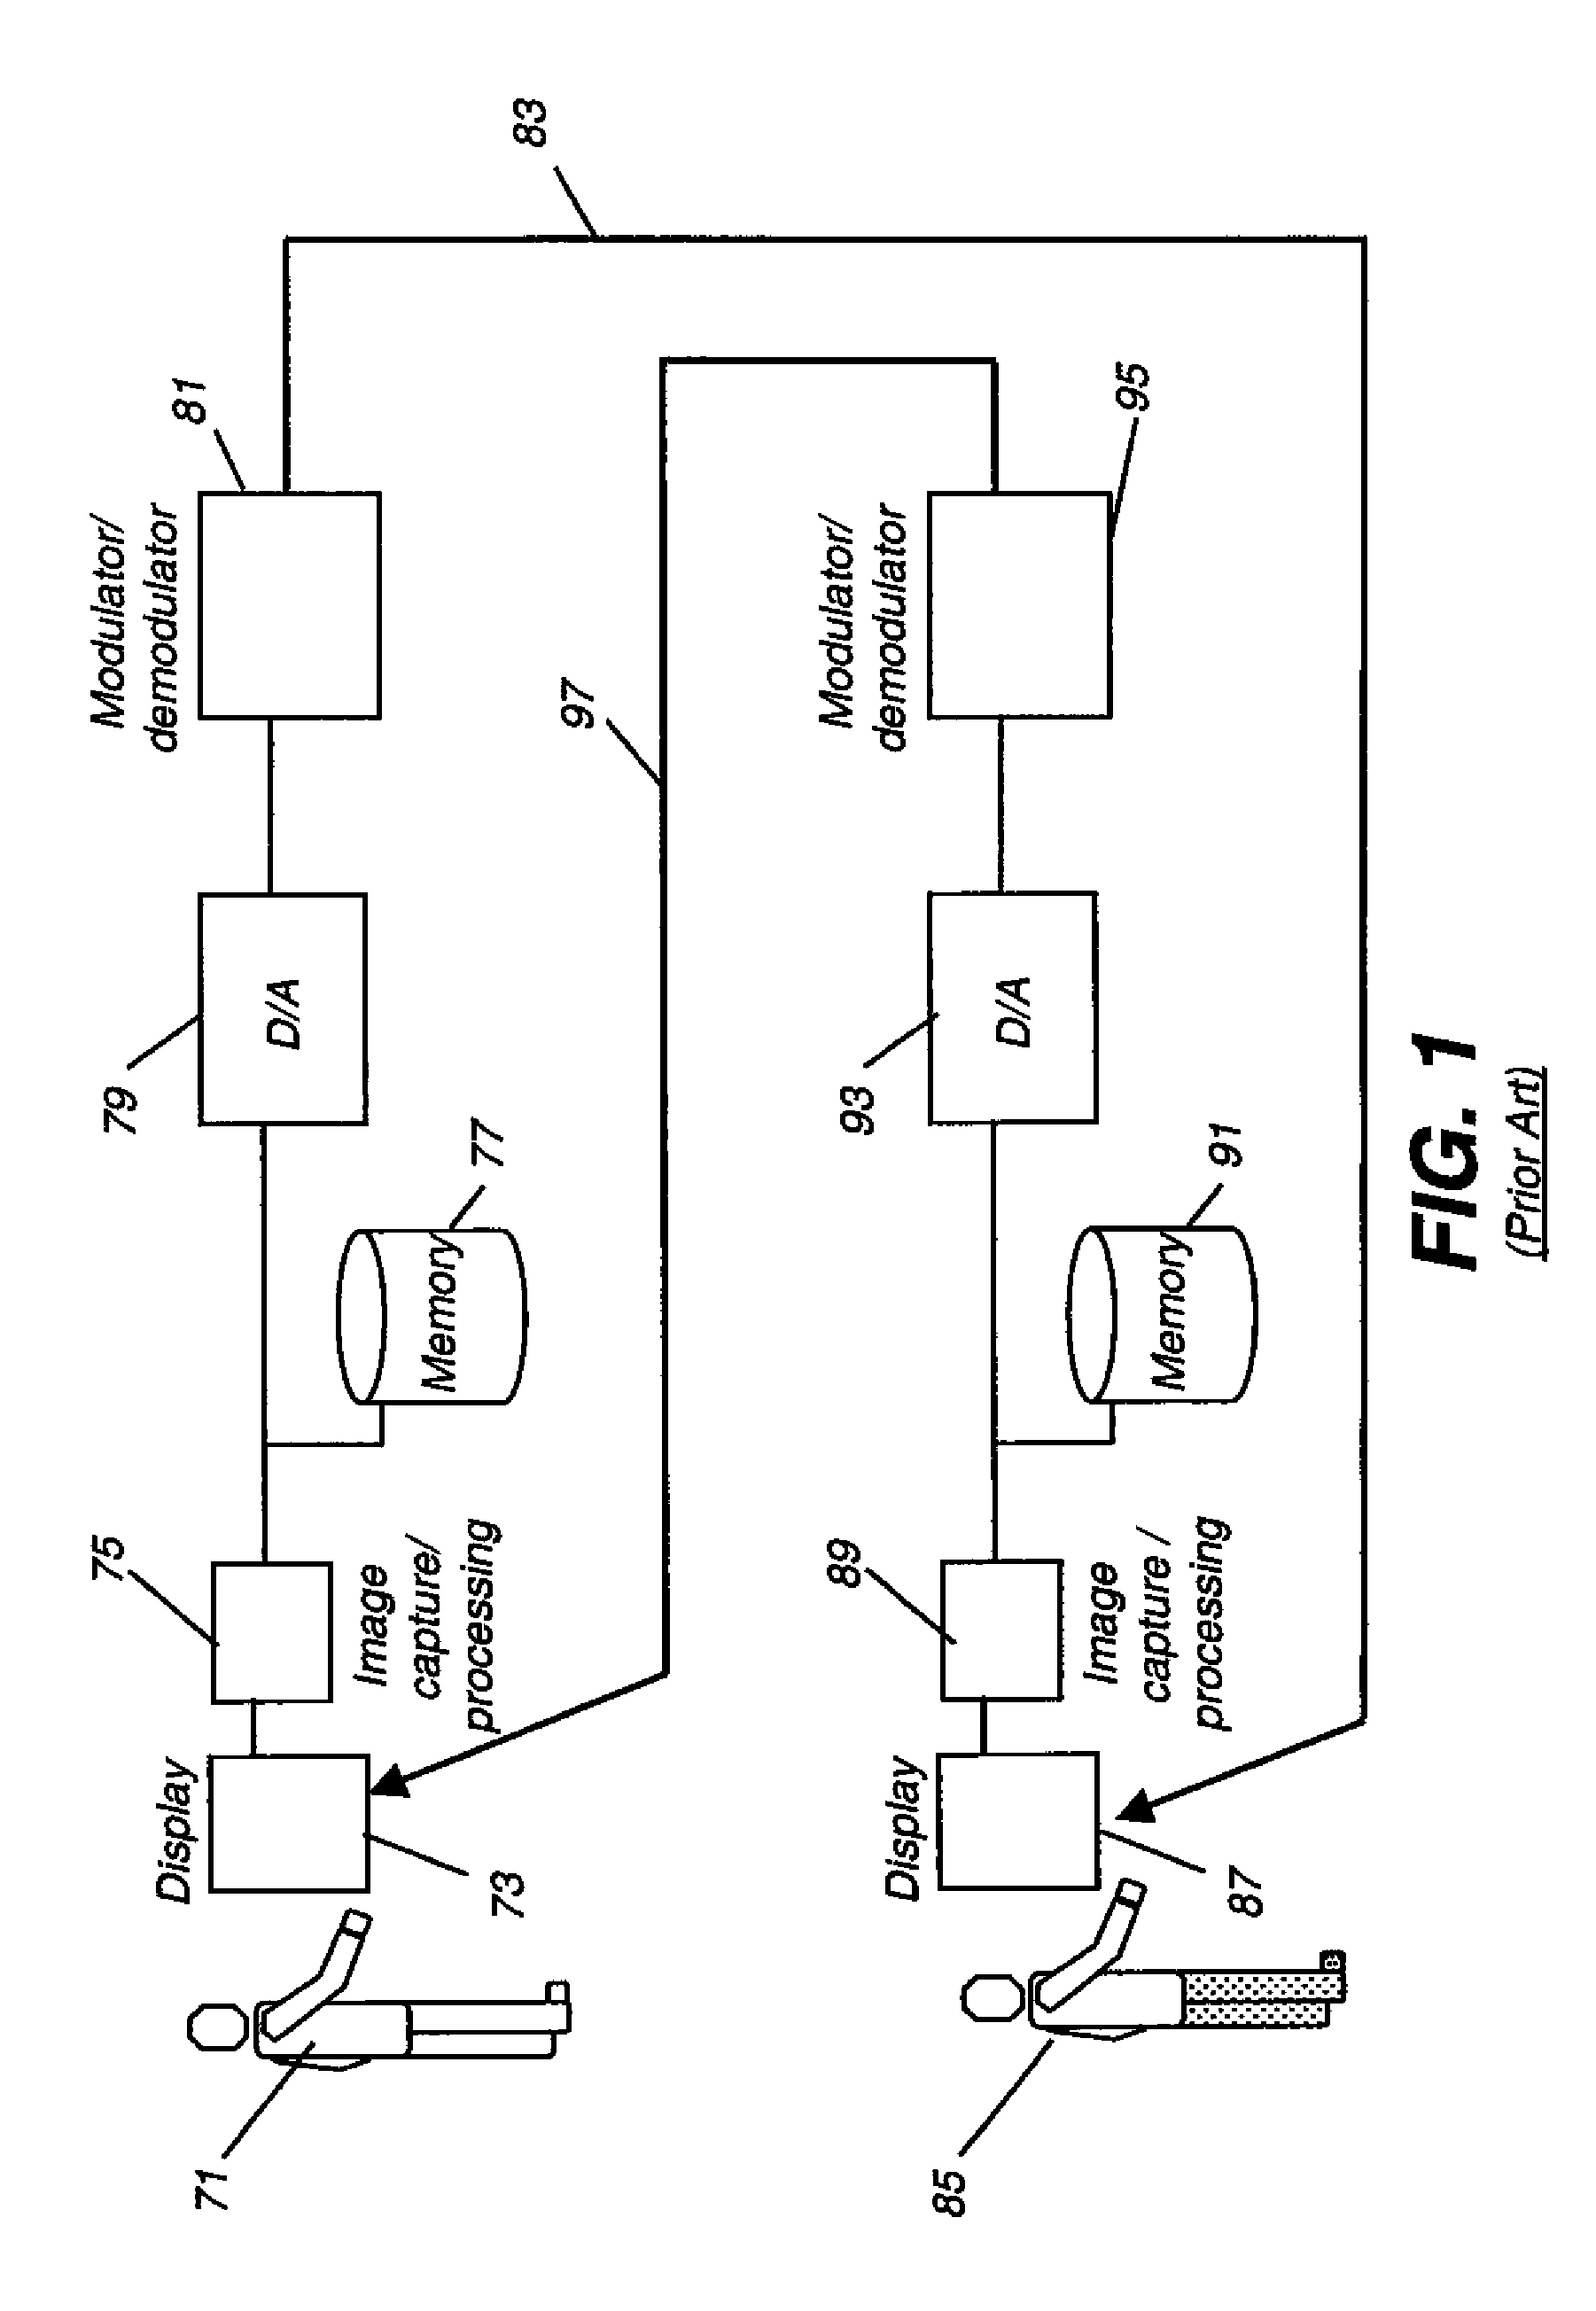 Integrated display and capture apparatus